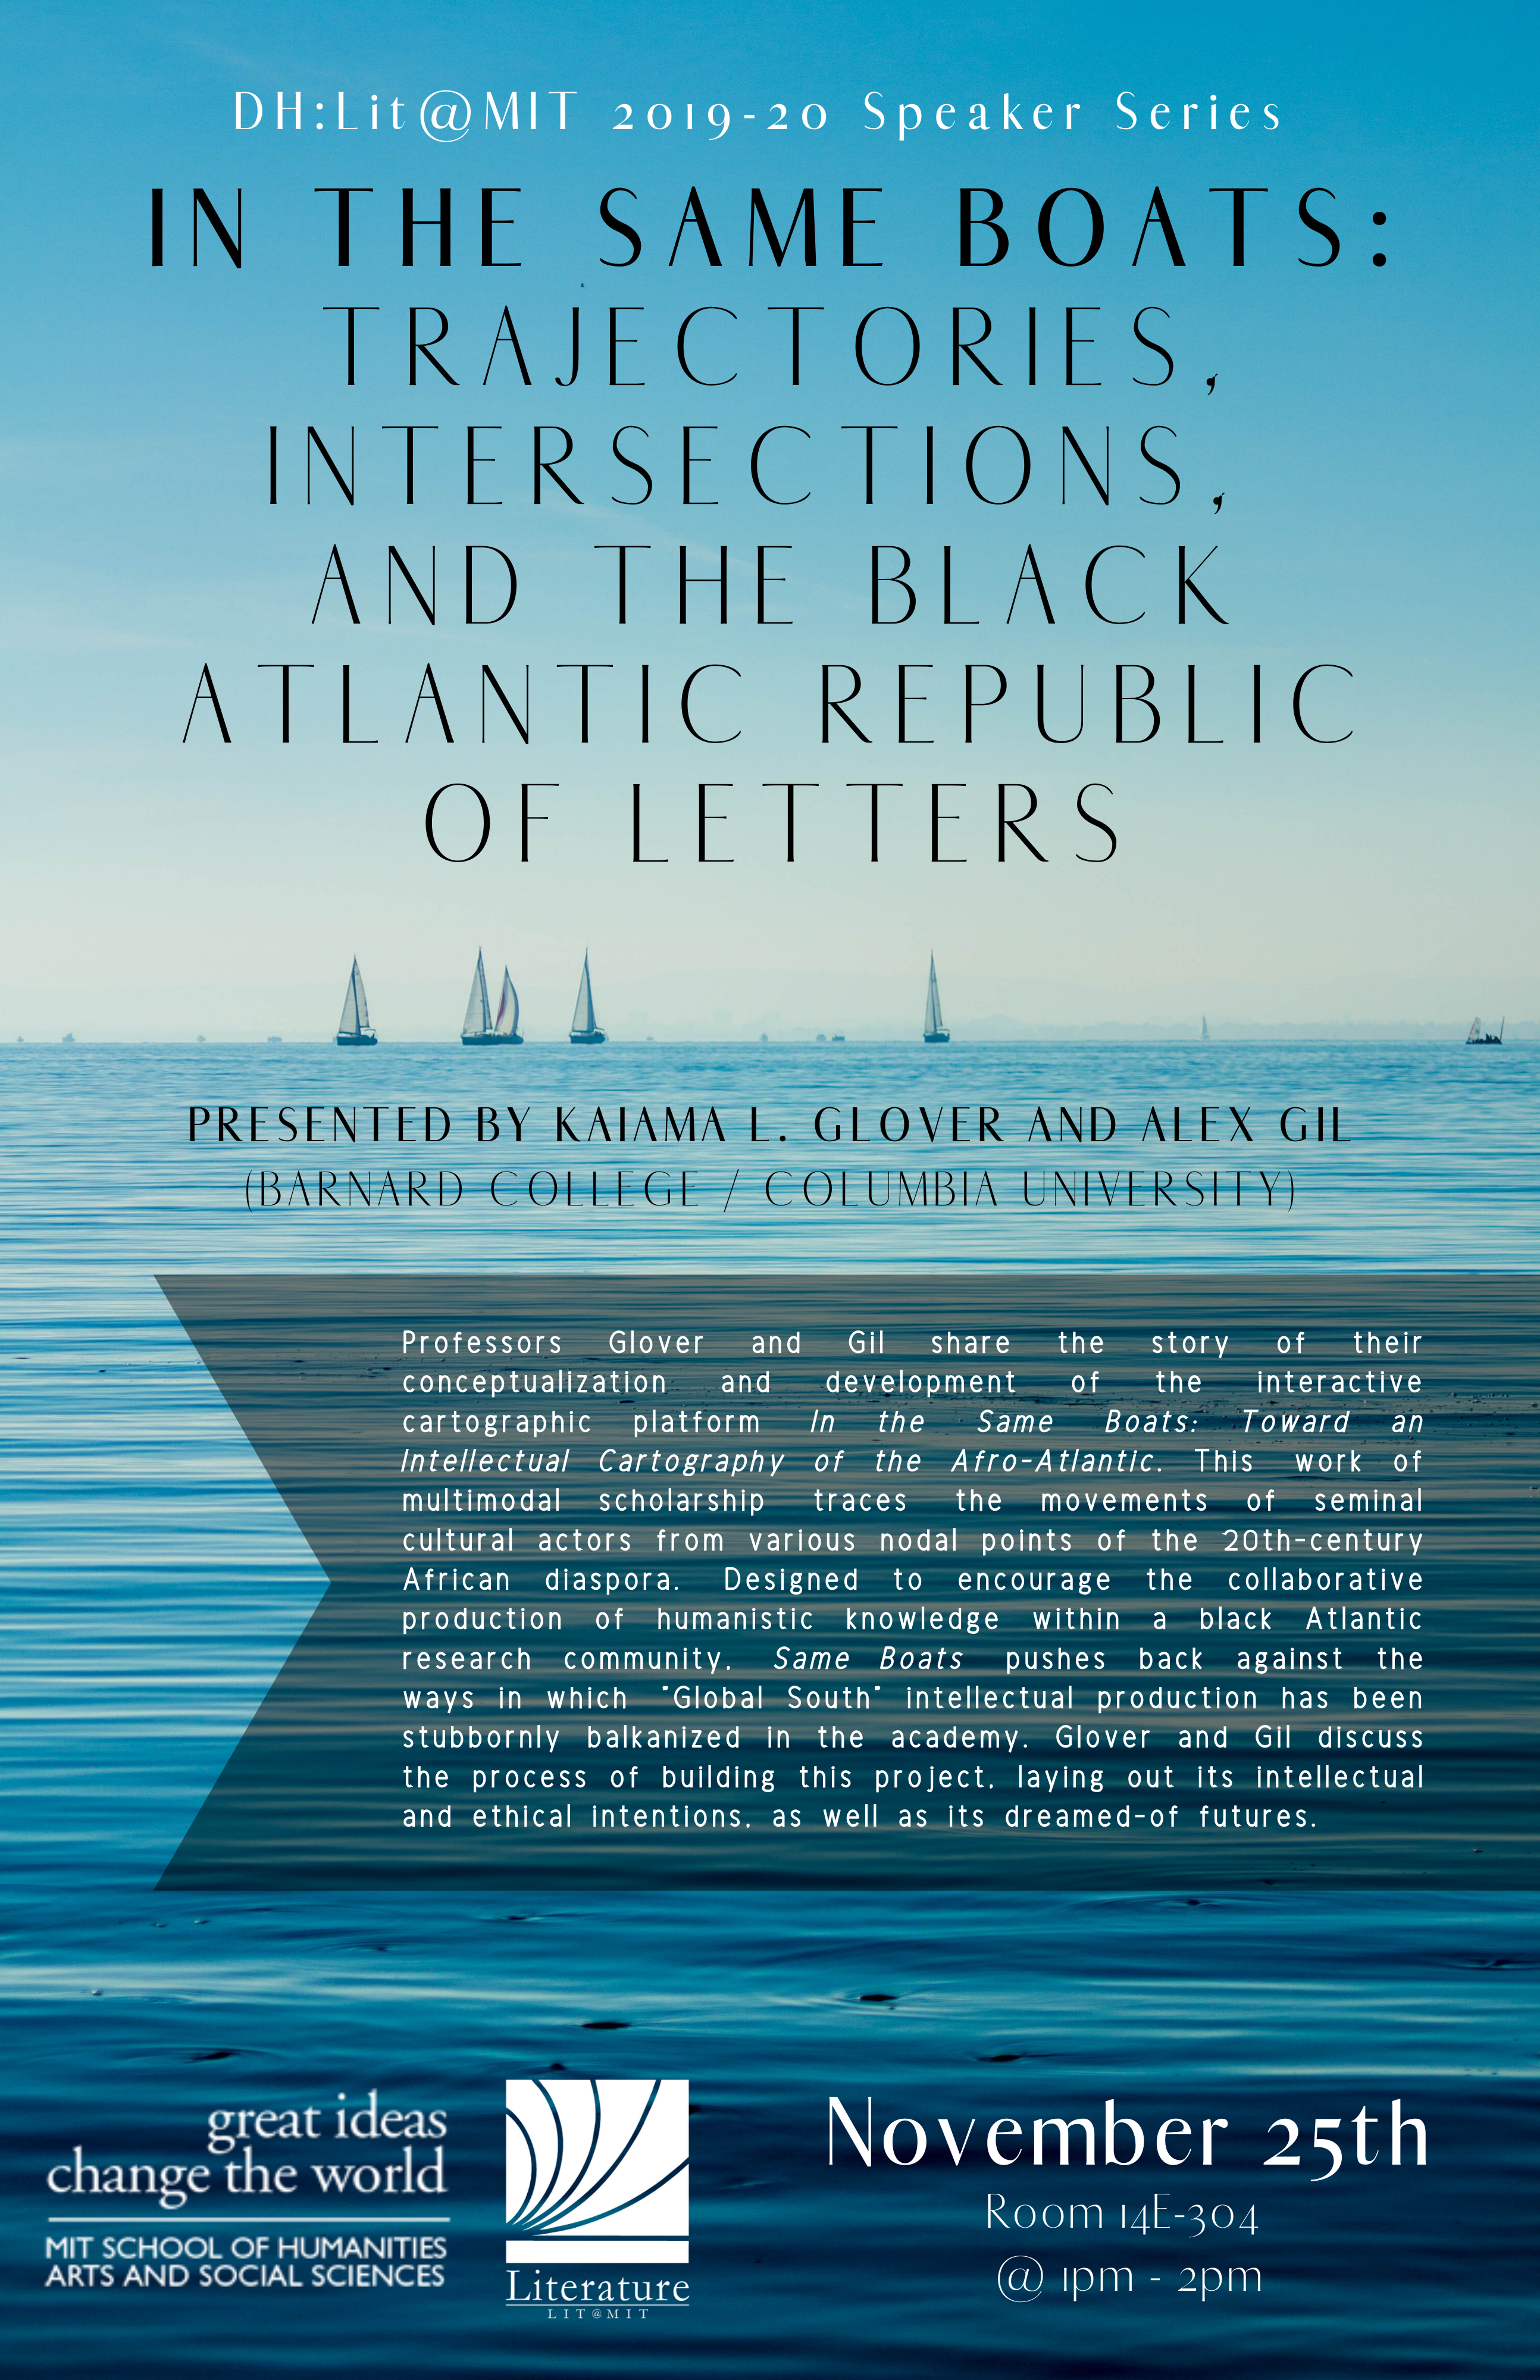 In the Same Boats: Trajectories, Intersections, and the Black Atlantic Republic of Letters